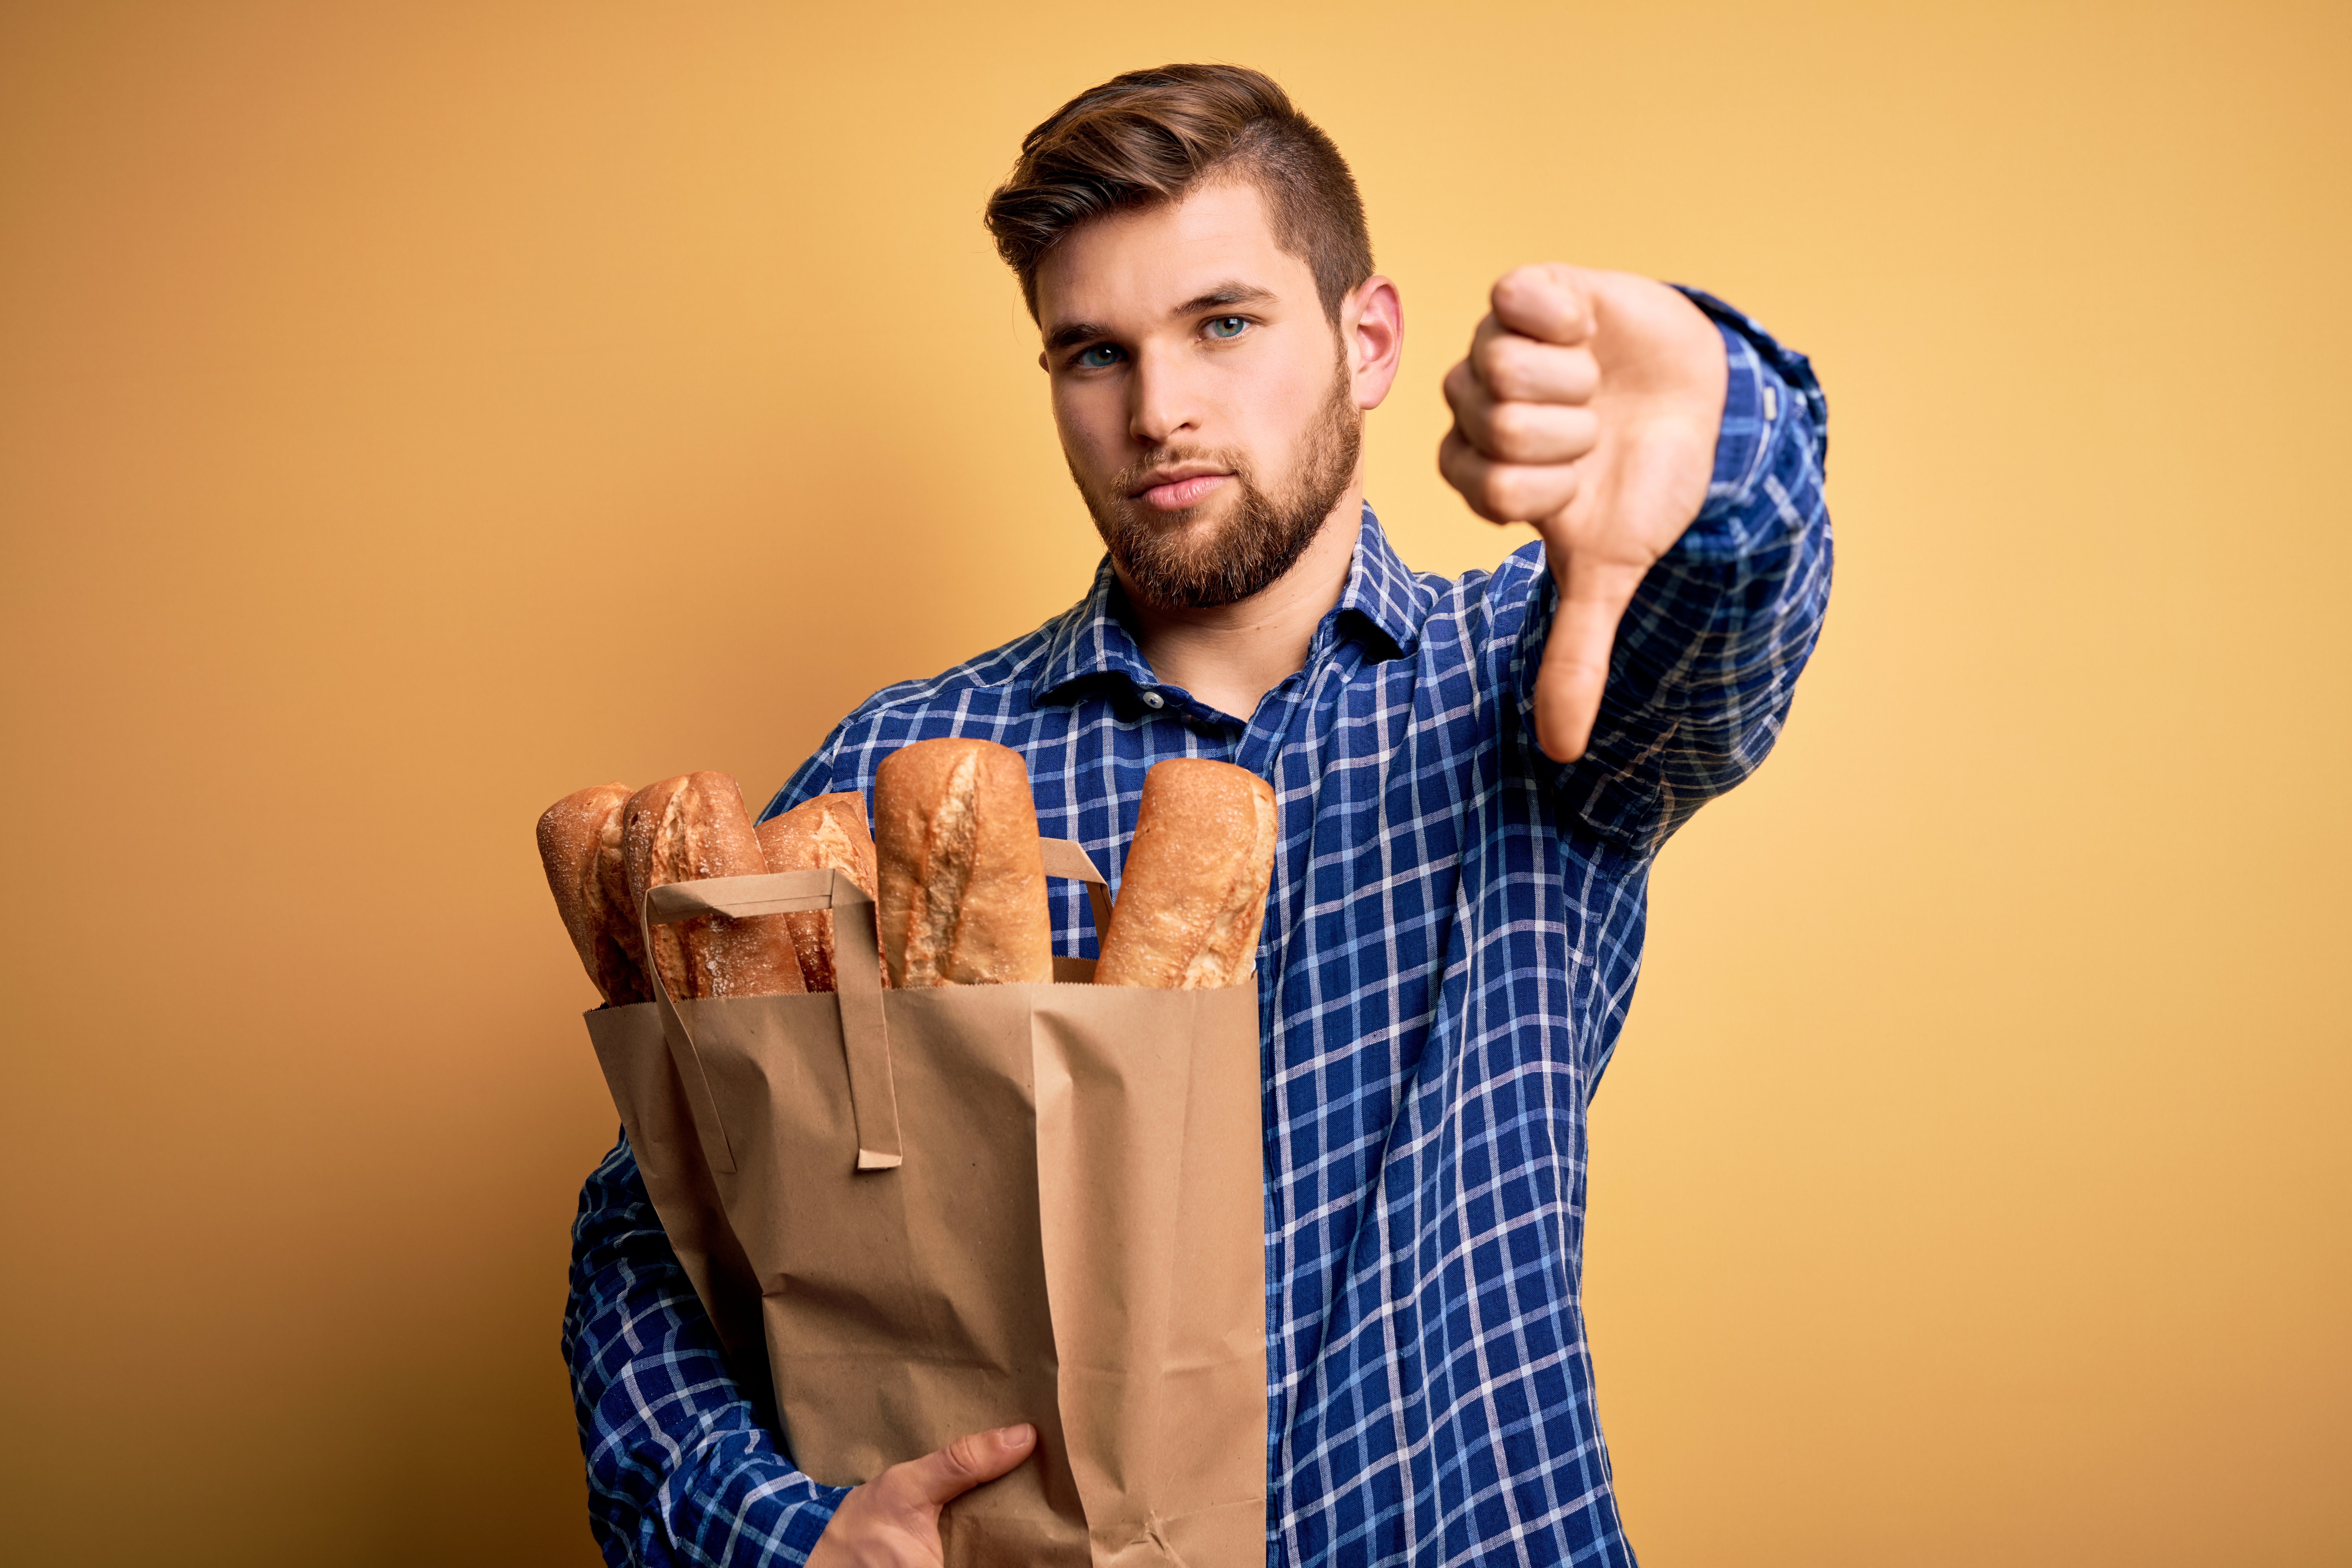 a man holding a bag of bread giving thumbs down.